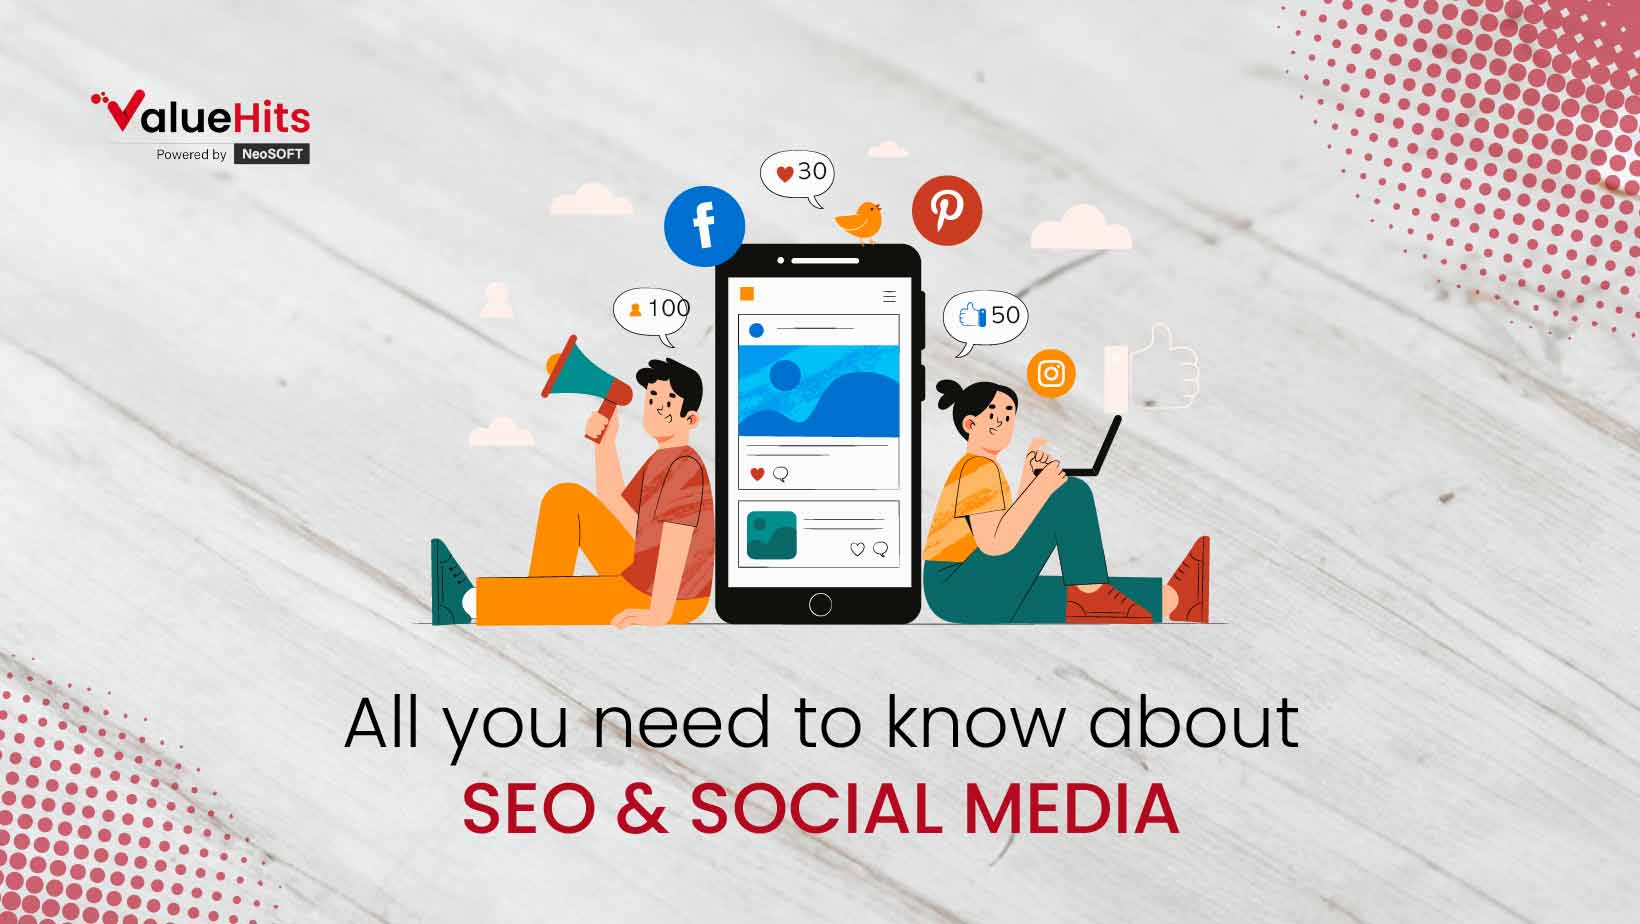 All you need to know about SEO & Social media